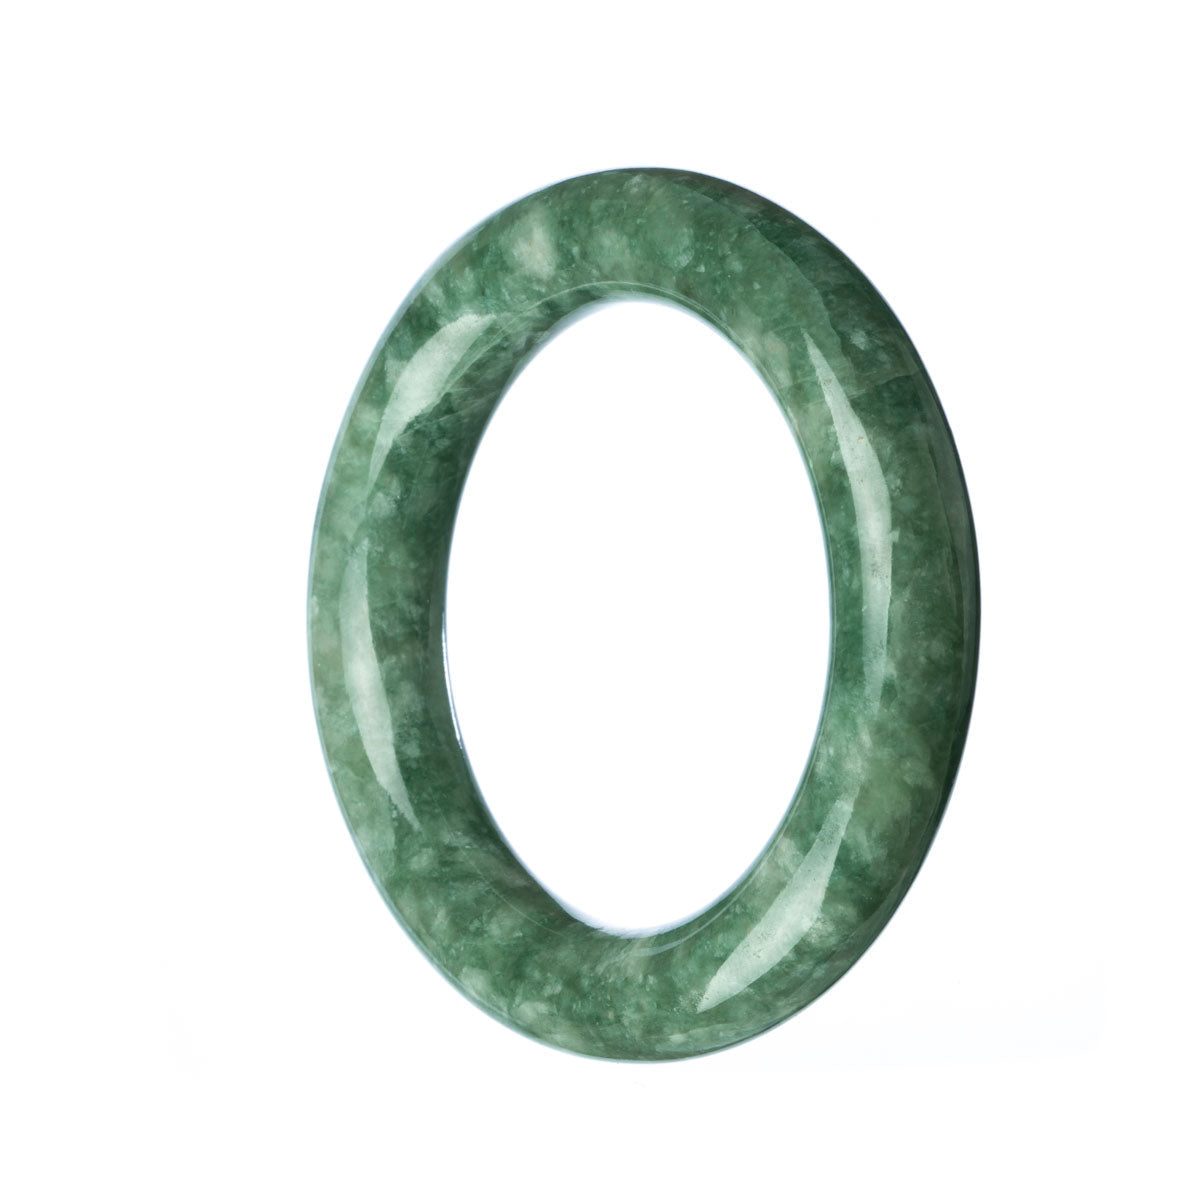 A round, untreated green jadeite bangle with a diameter of 52mm, crafted by MAYS™.